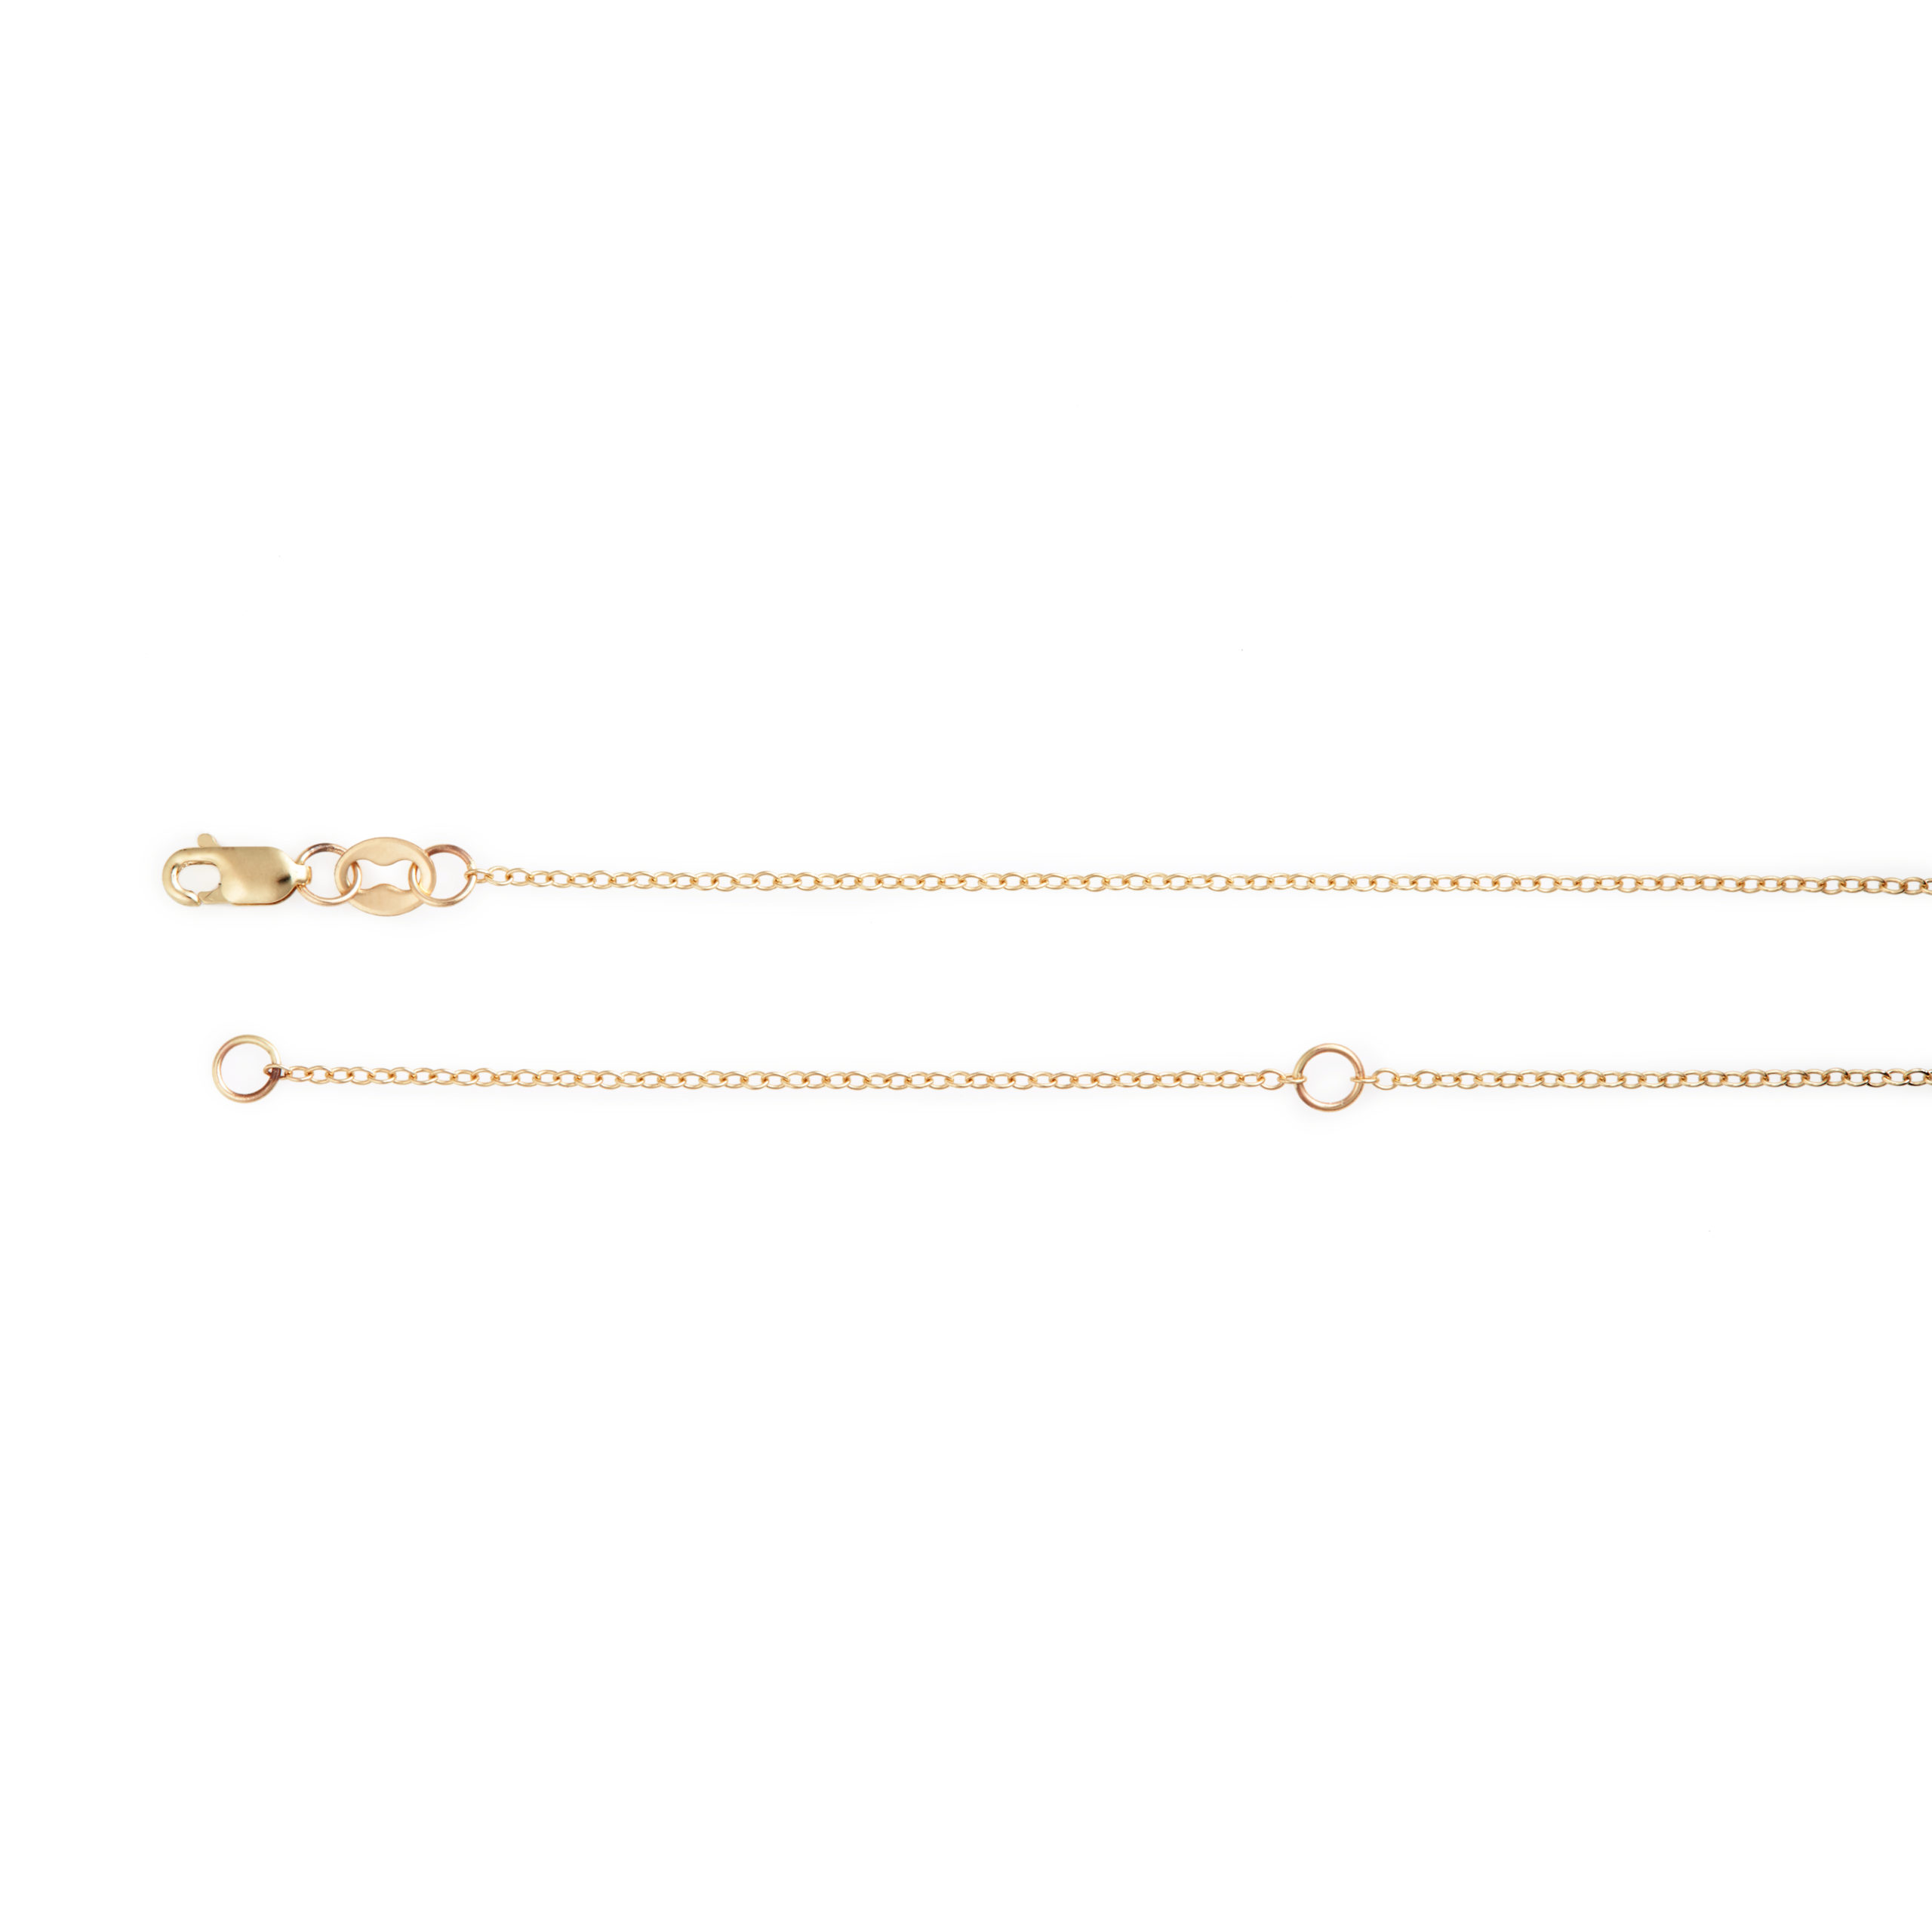 Best All Around Necklace: Gold Chain, Gold Bead Accents Adjustable 16/18 Inches